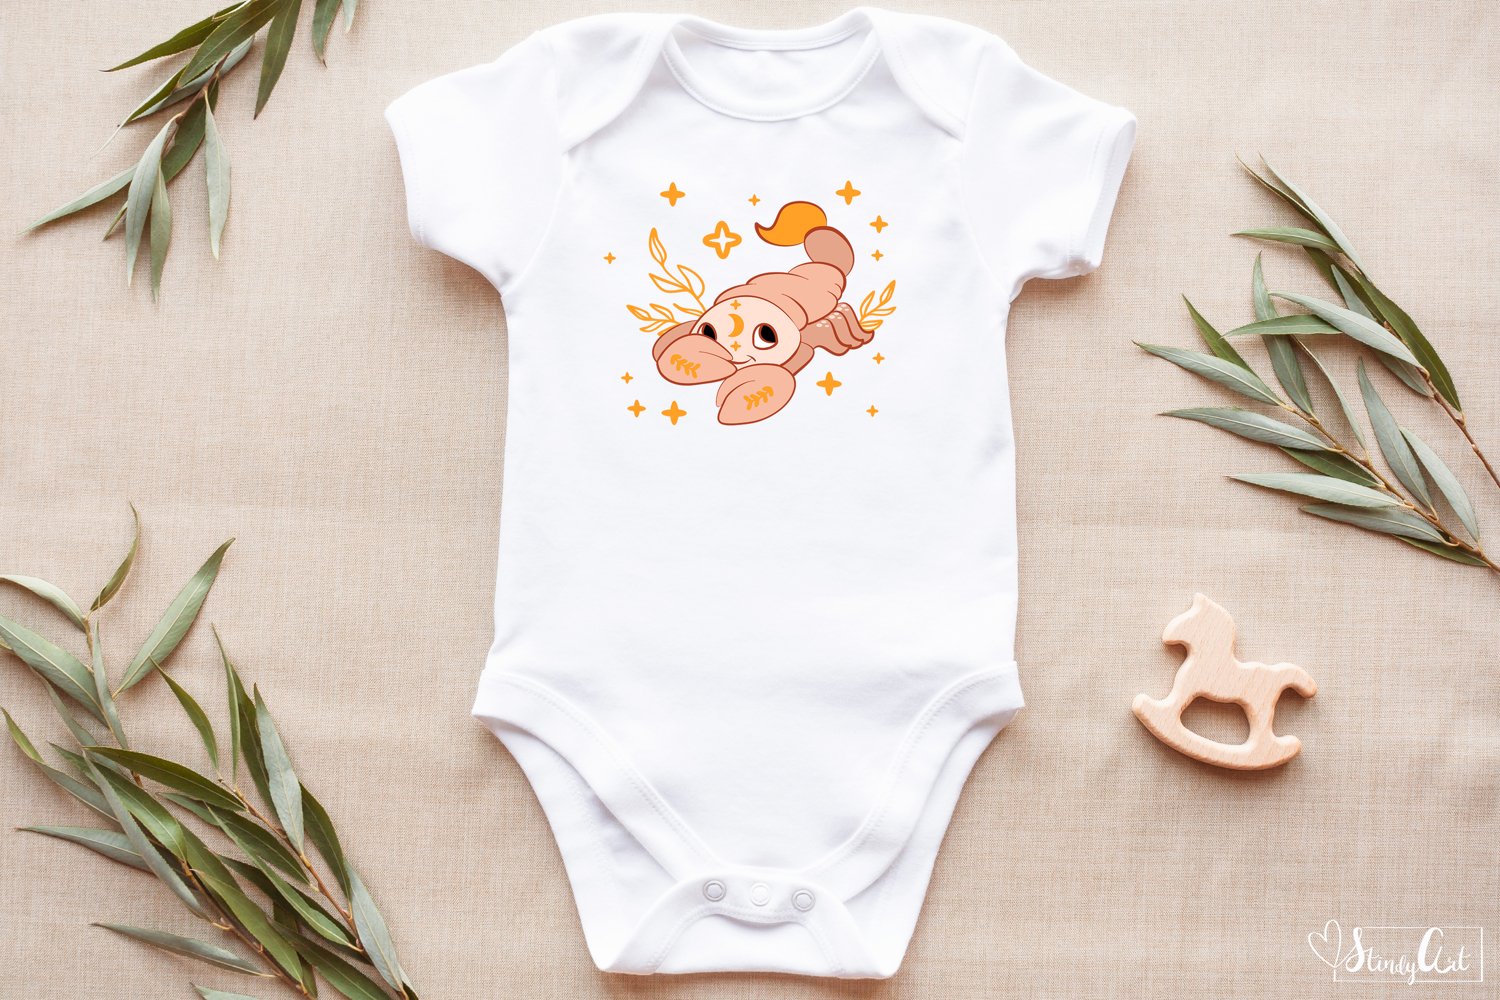 White baby bodysuit with a monkey on it.